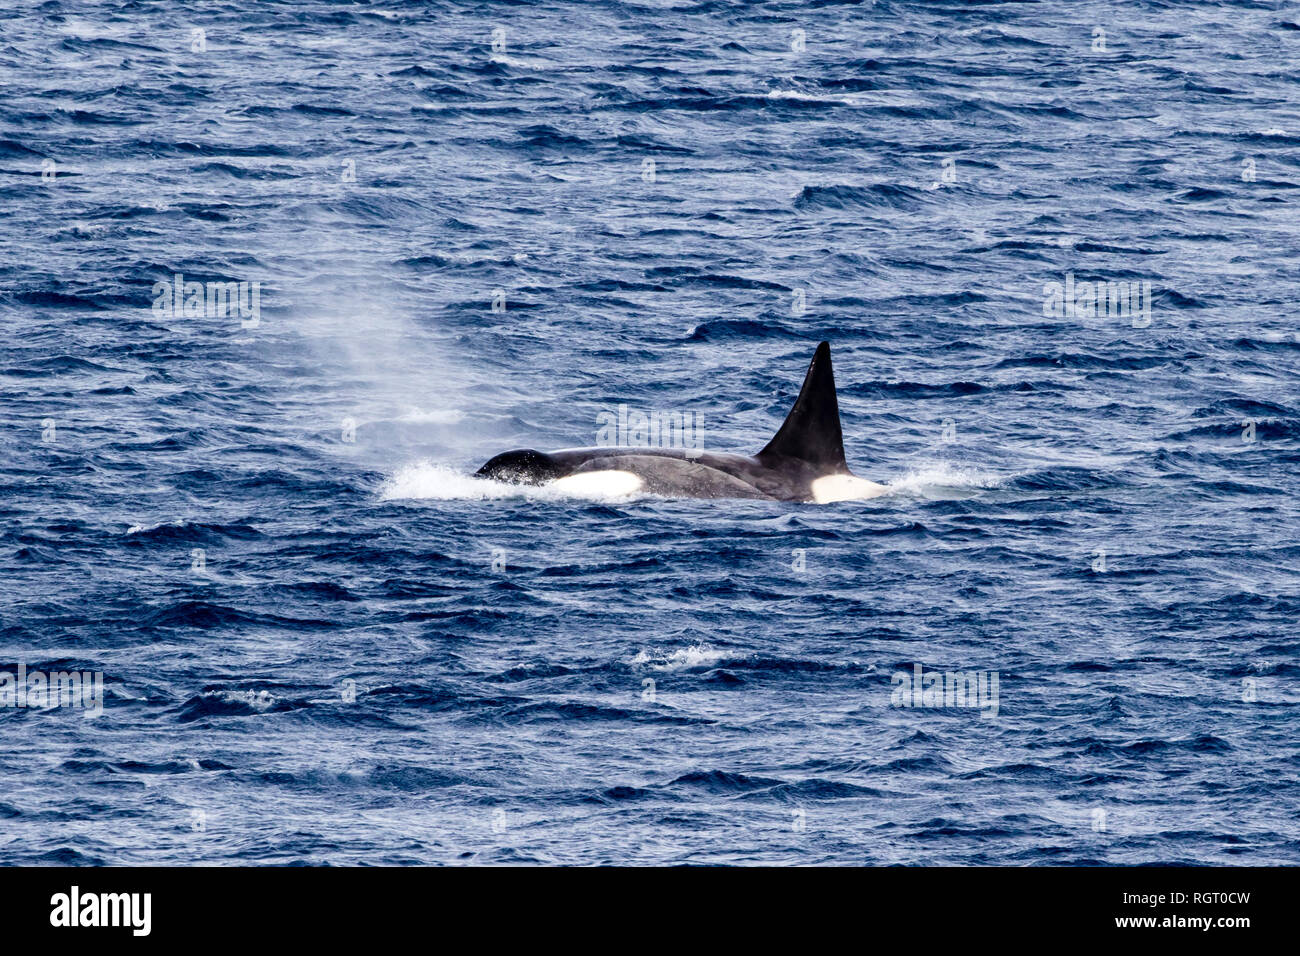 Orca / Killer Whale (Orcinus orca) Type B in the Weddell Sea near Snow Hill Island, the Antarctic Stock Photo